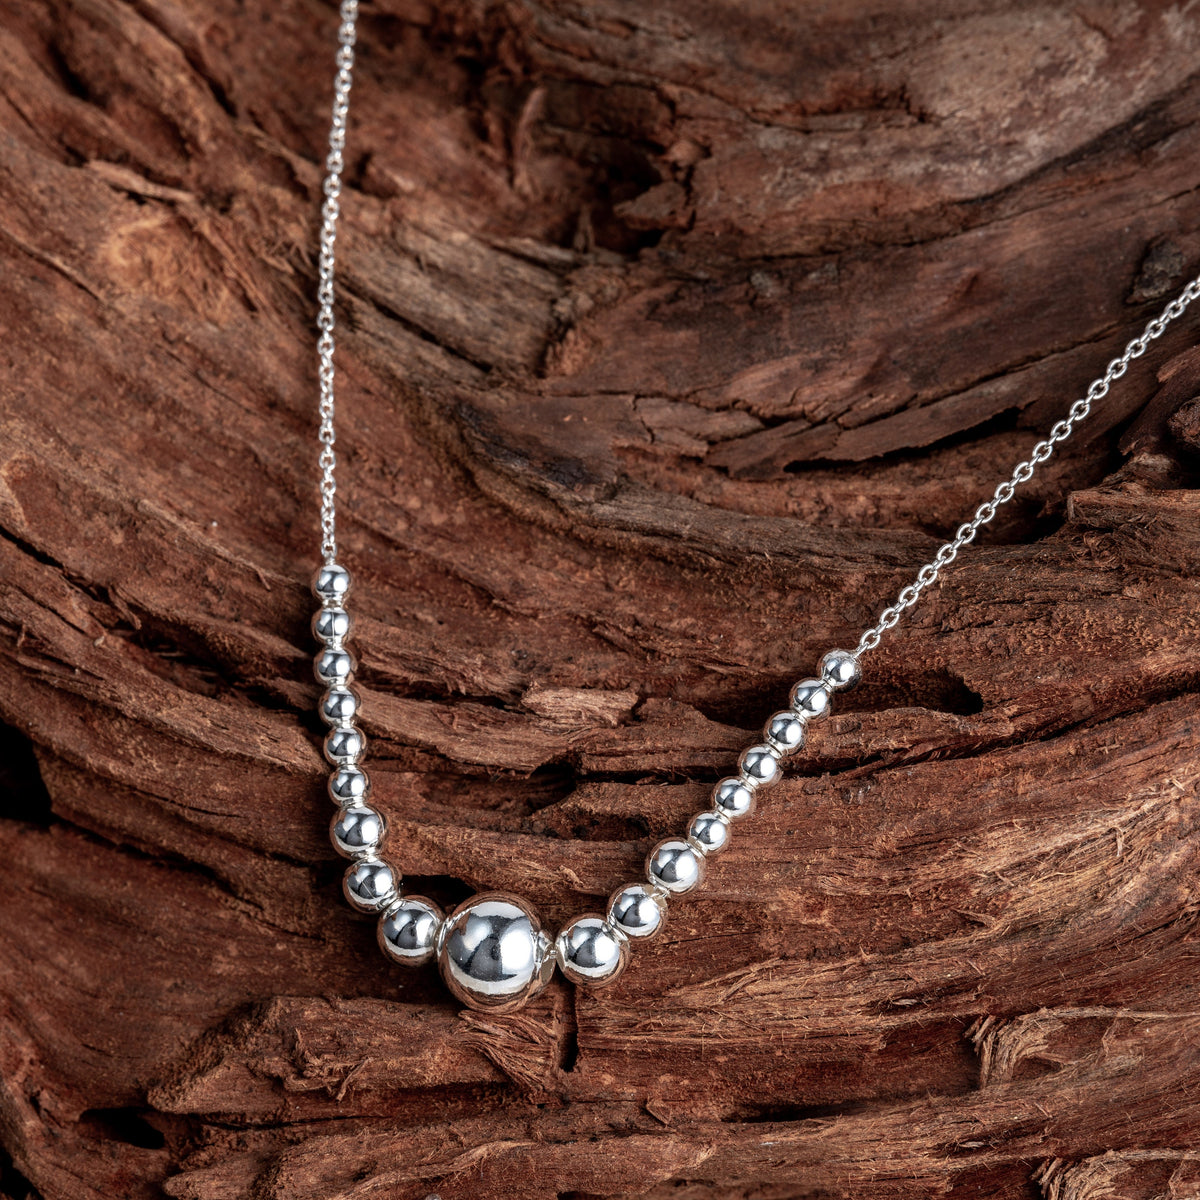 Ball Necklace 925 Sterling Silver 17 Inch